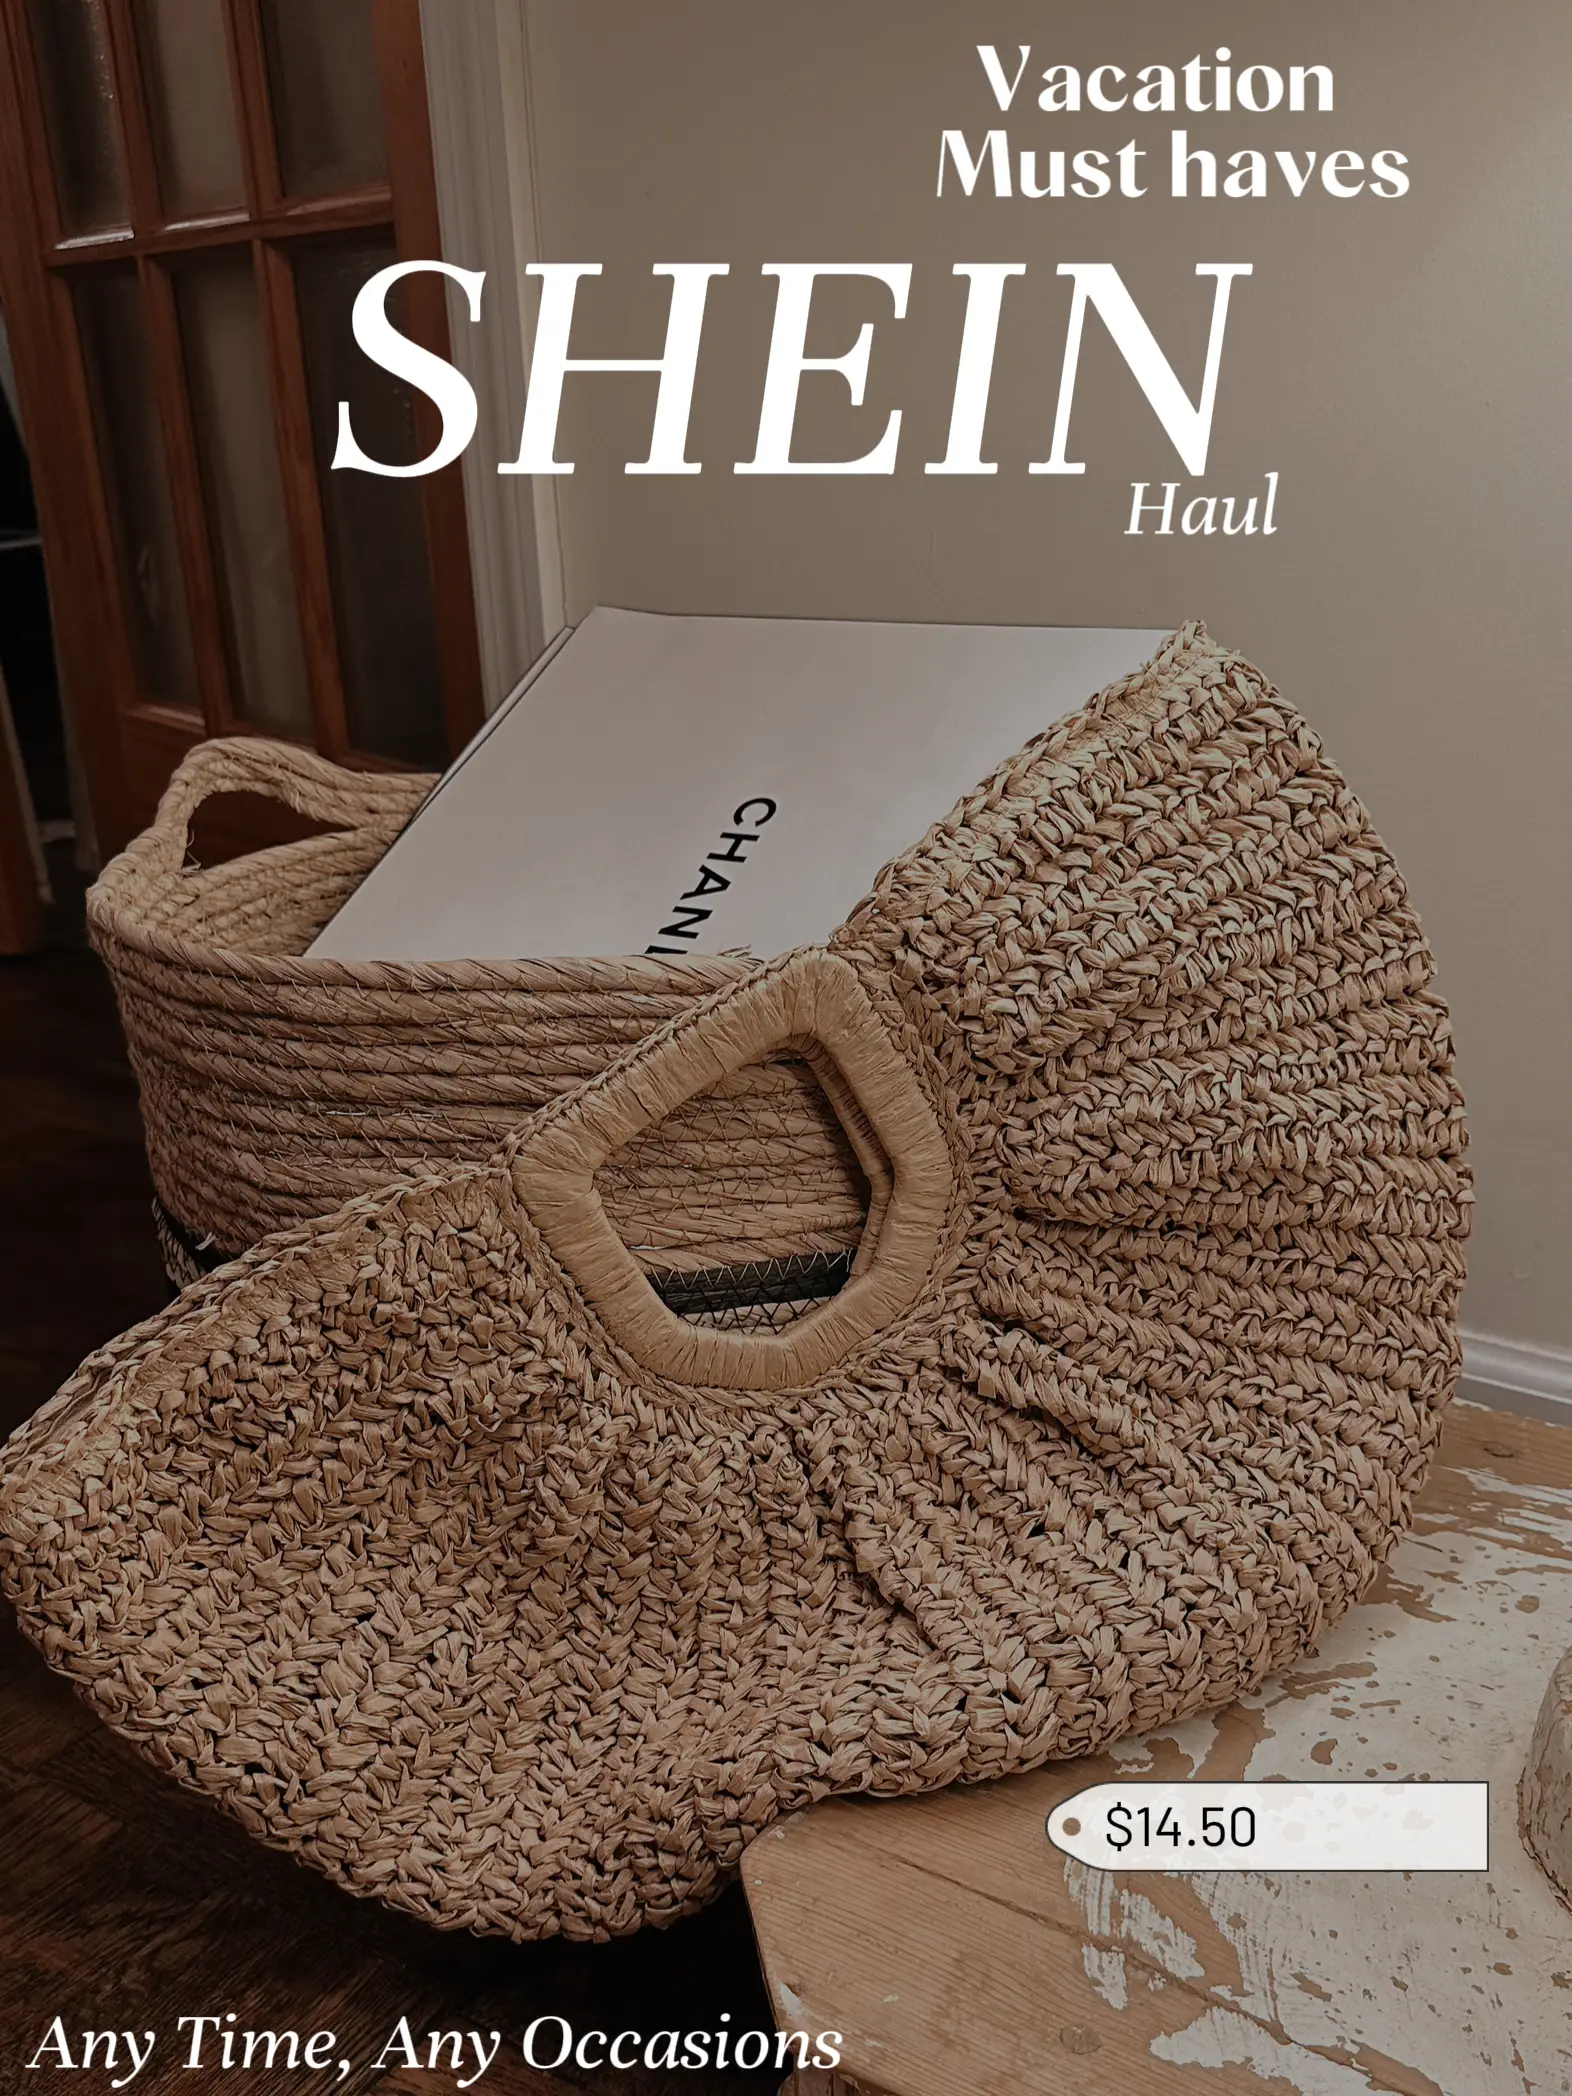 SHEIN HAUL, Vacation Must-Haves, Gallery posted by Sophie Nik